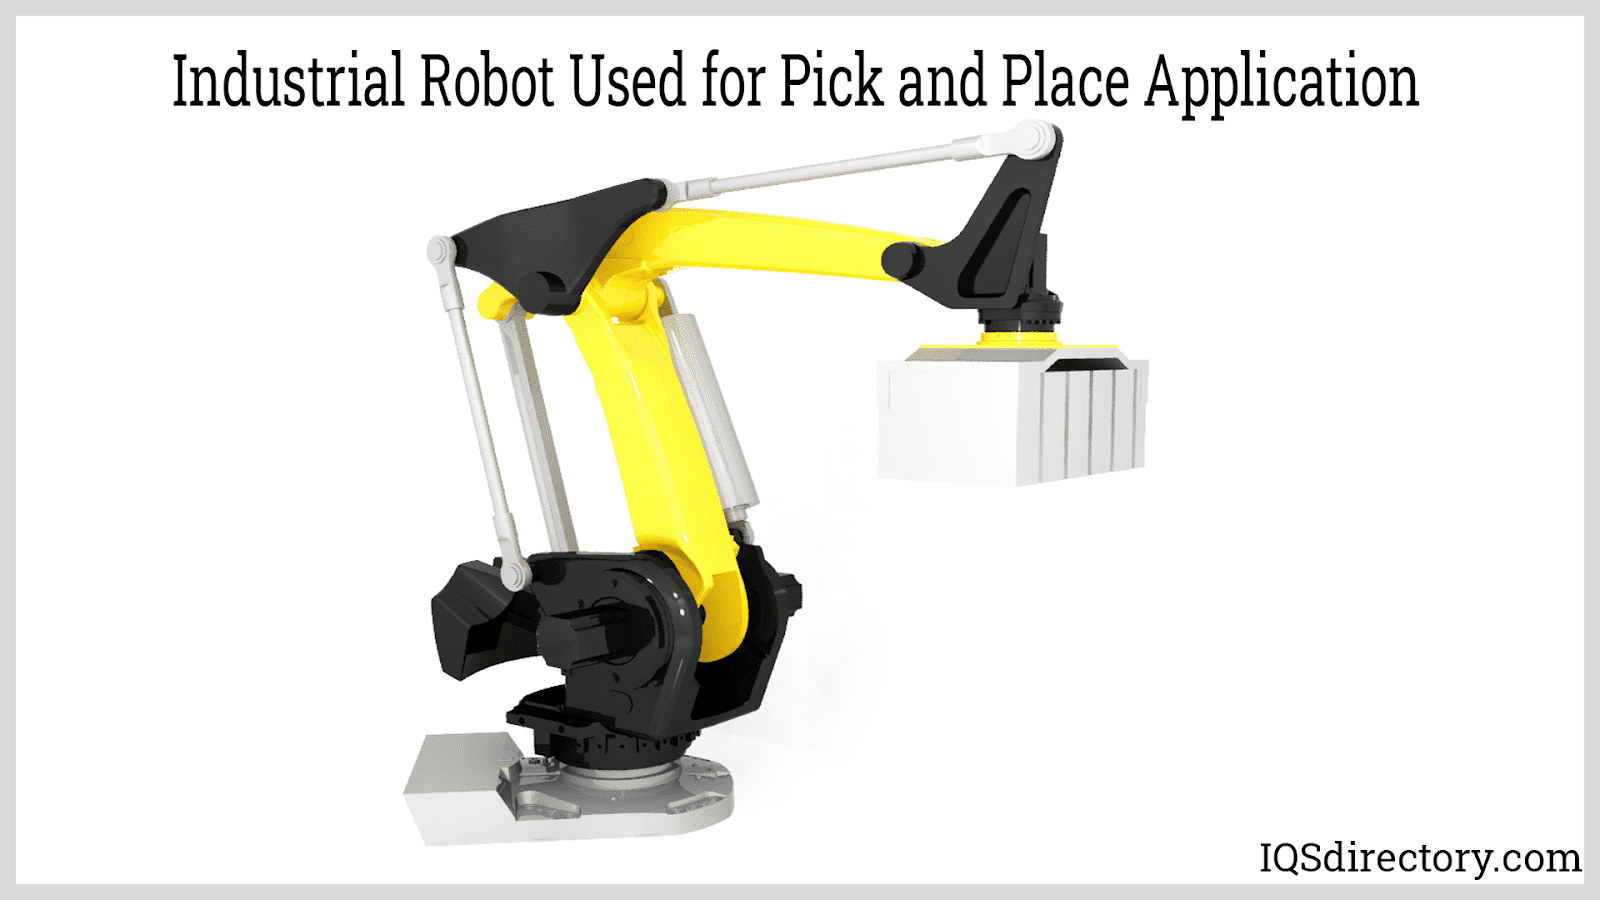 Industrial Robot Used for Pick and Place Application